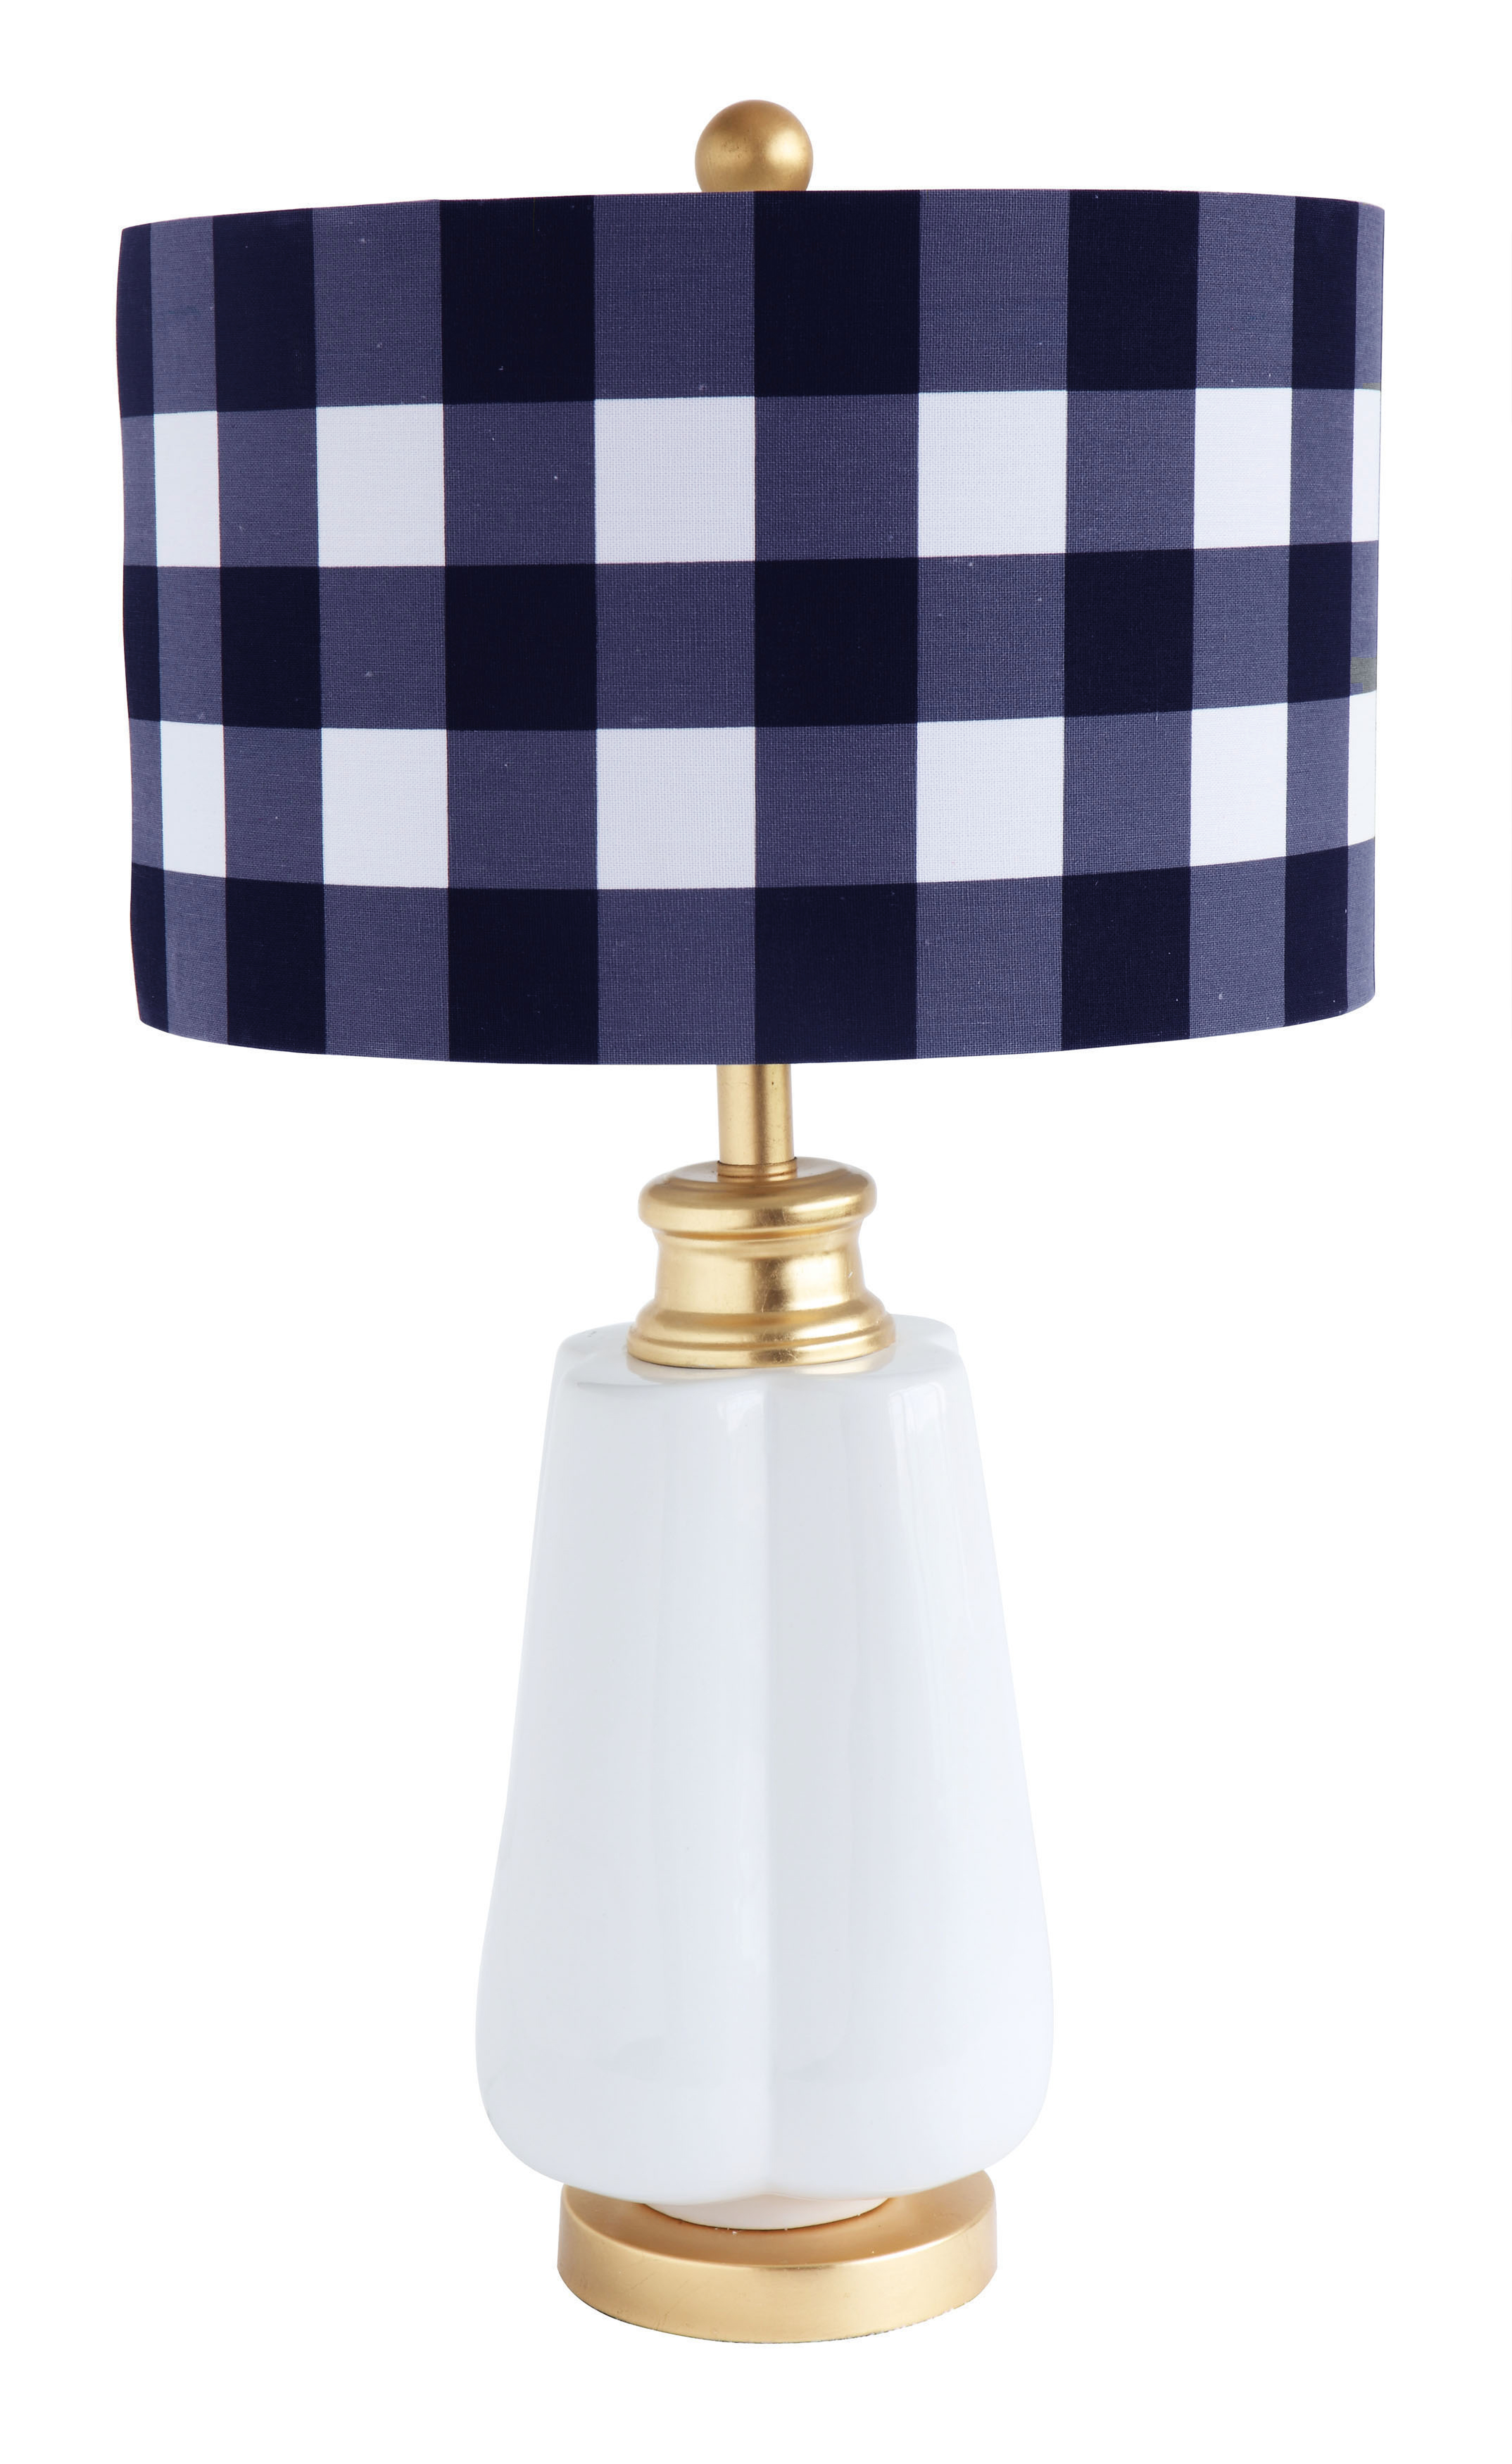 Ceramic Table Lamp with Gold Accents & Blue/White Gingham Linen Shade - Nomad Home